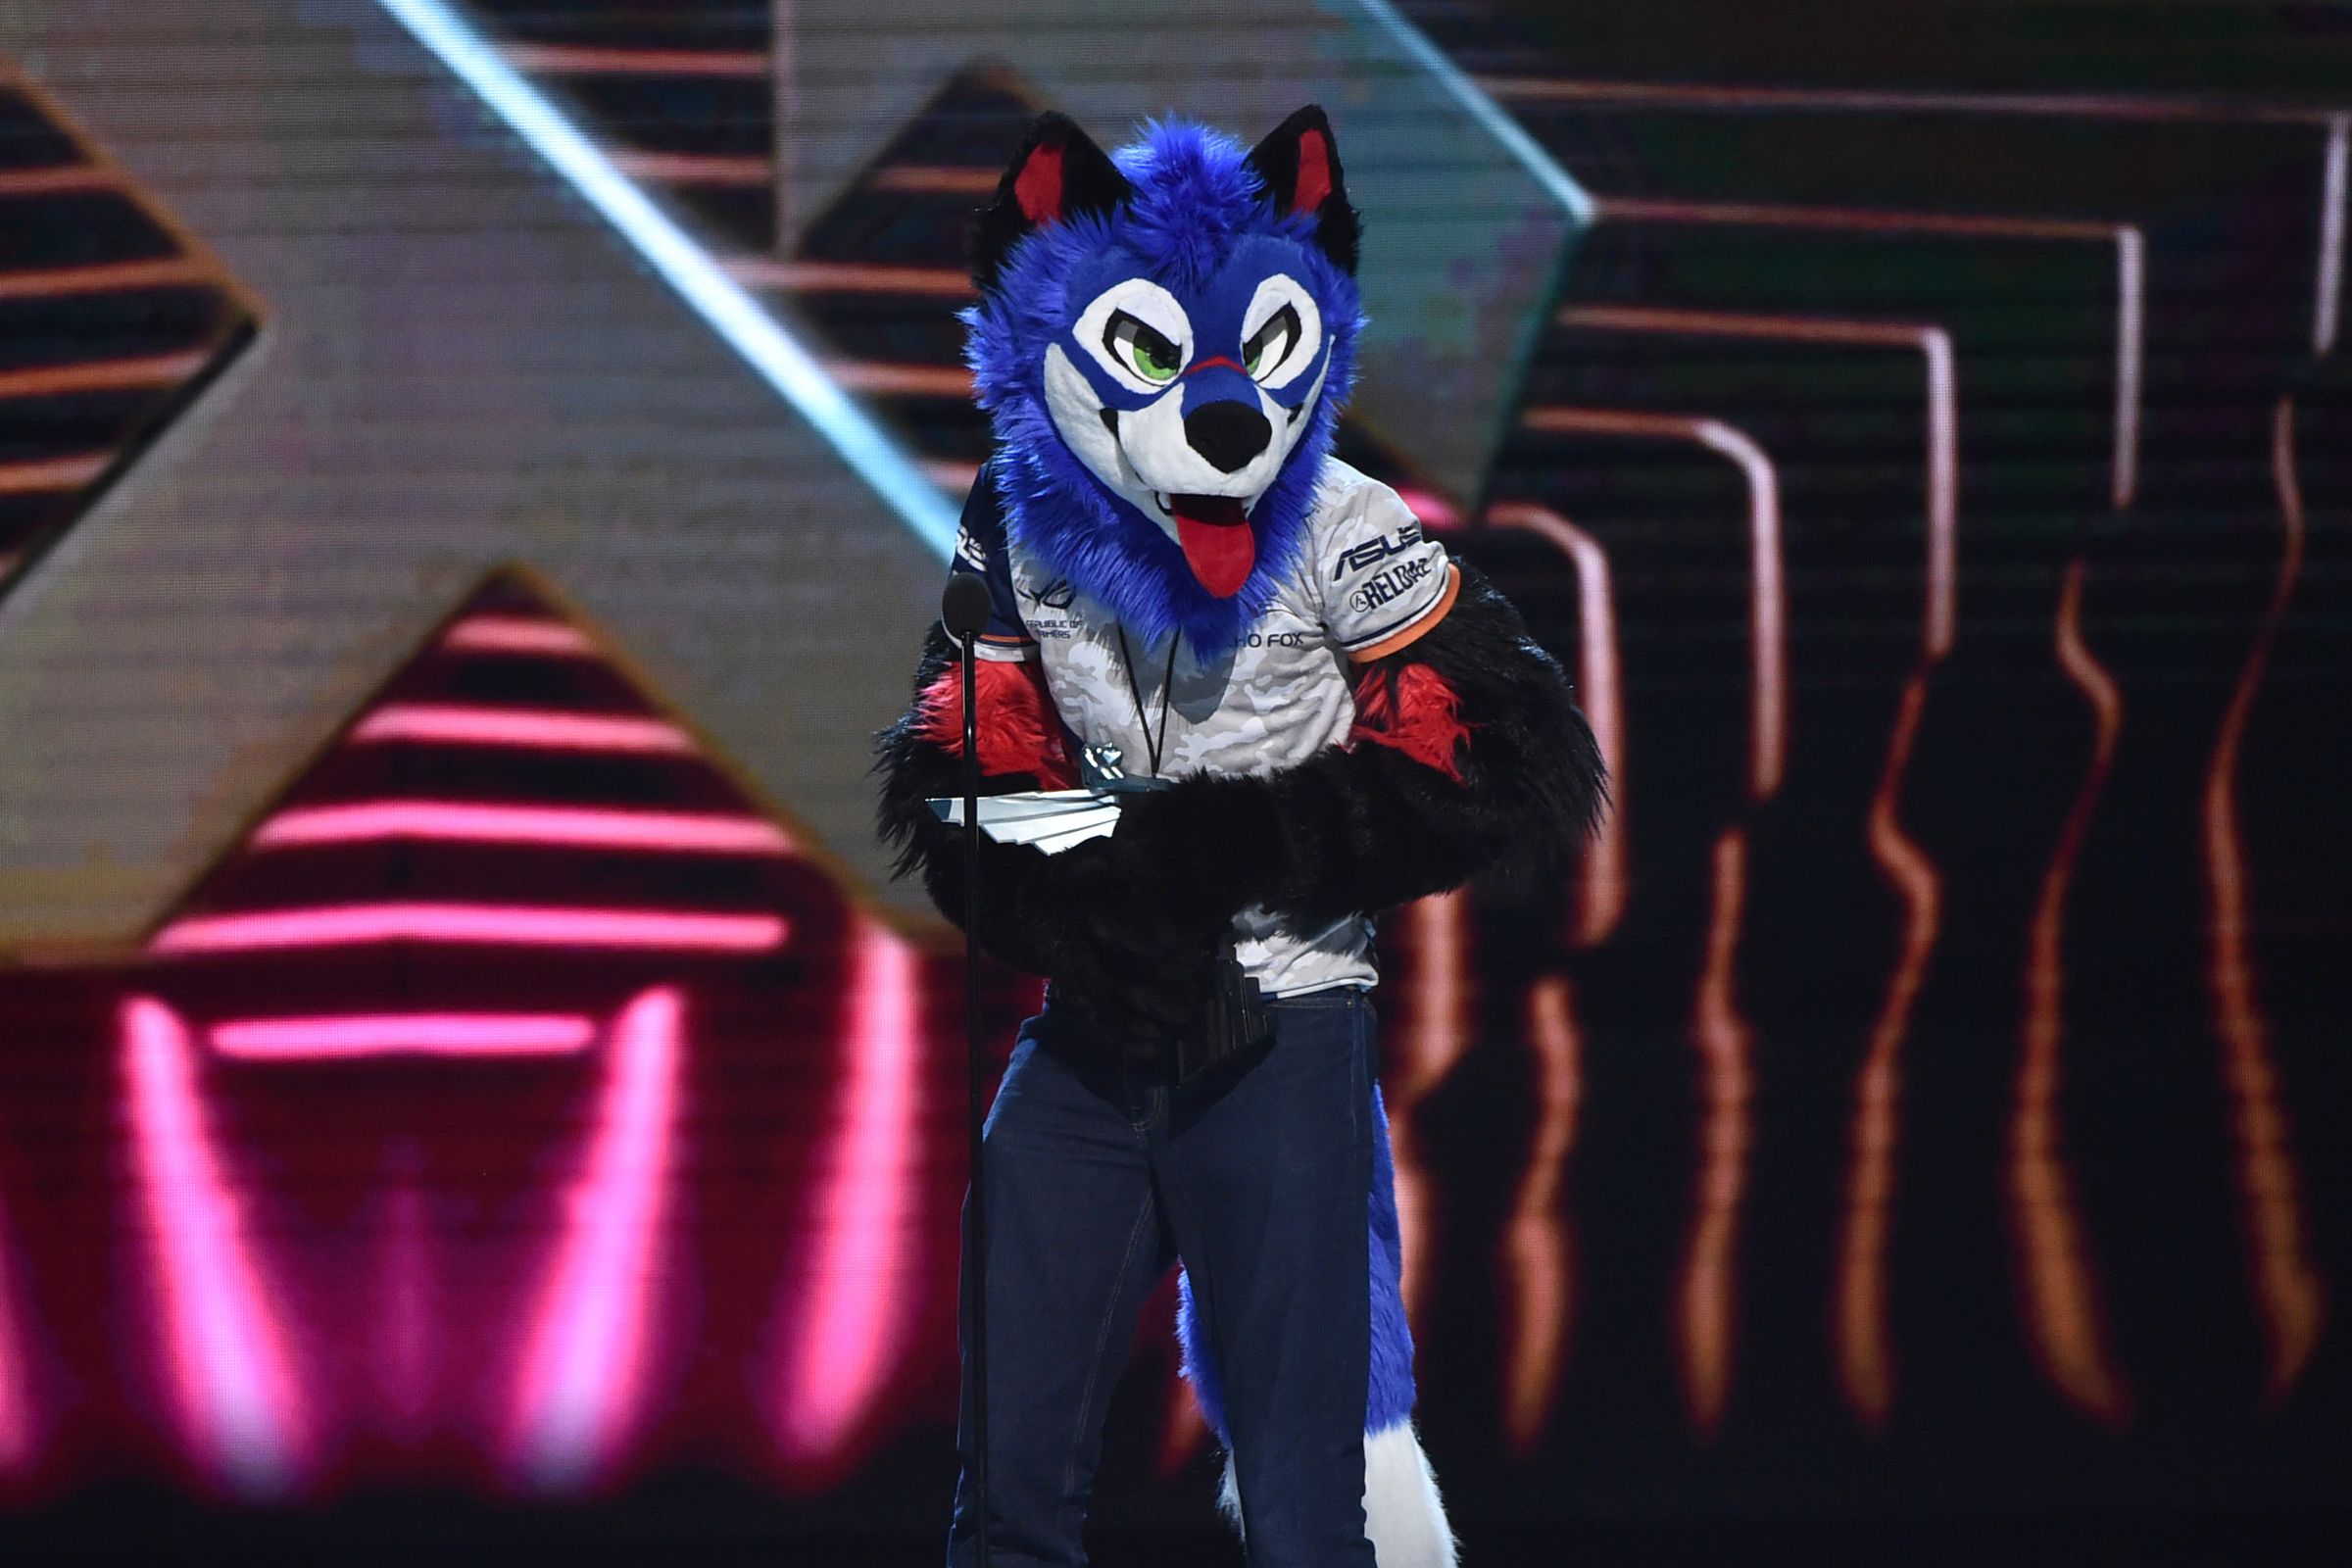 SonicFox onstage at the 2018 Game Awards.